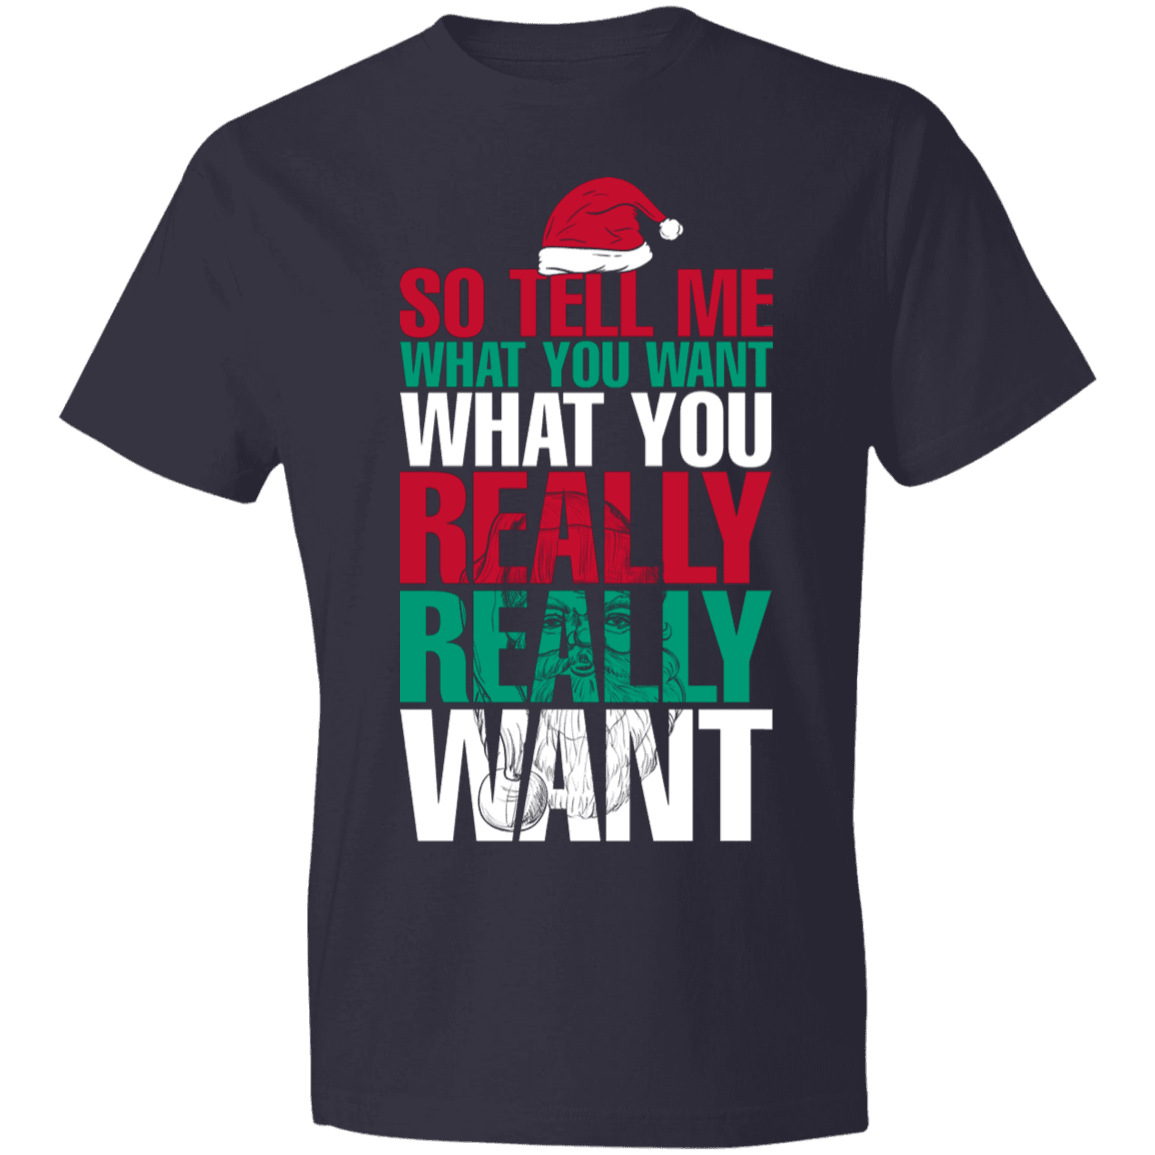 Designs by MyUtopia Shout Out:Tell Me What You Want - Lightweight Unisex T-Shirt,Navy / S,Adult Unisex T-Shirt